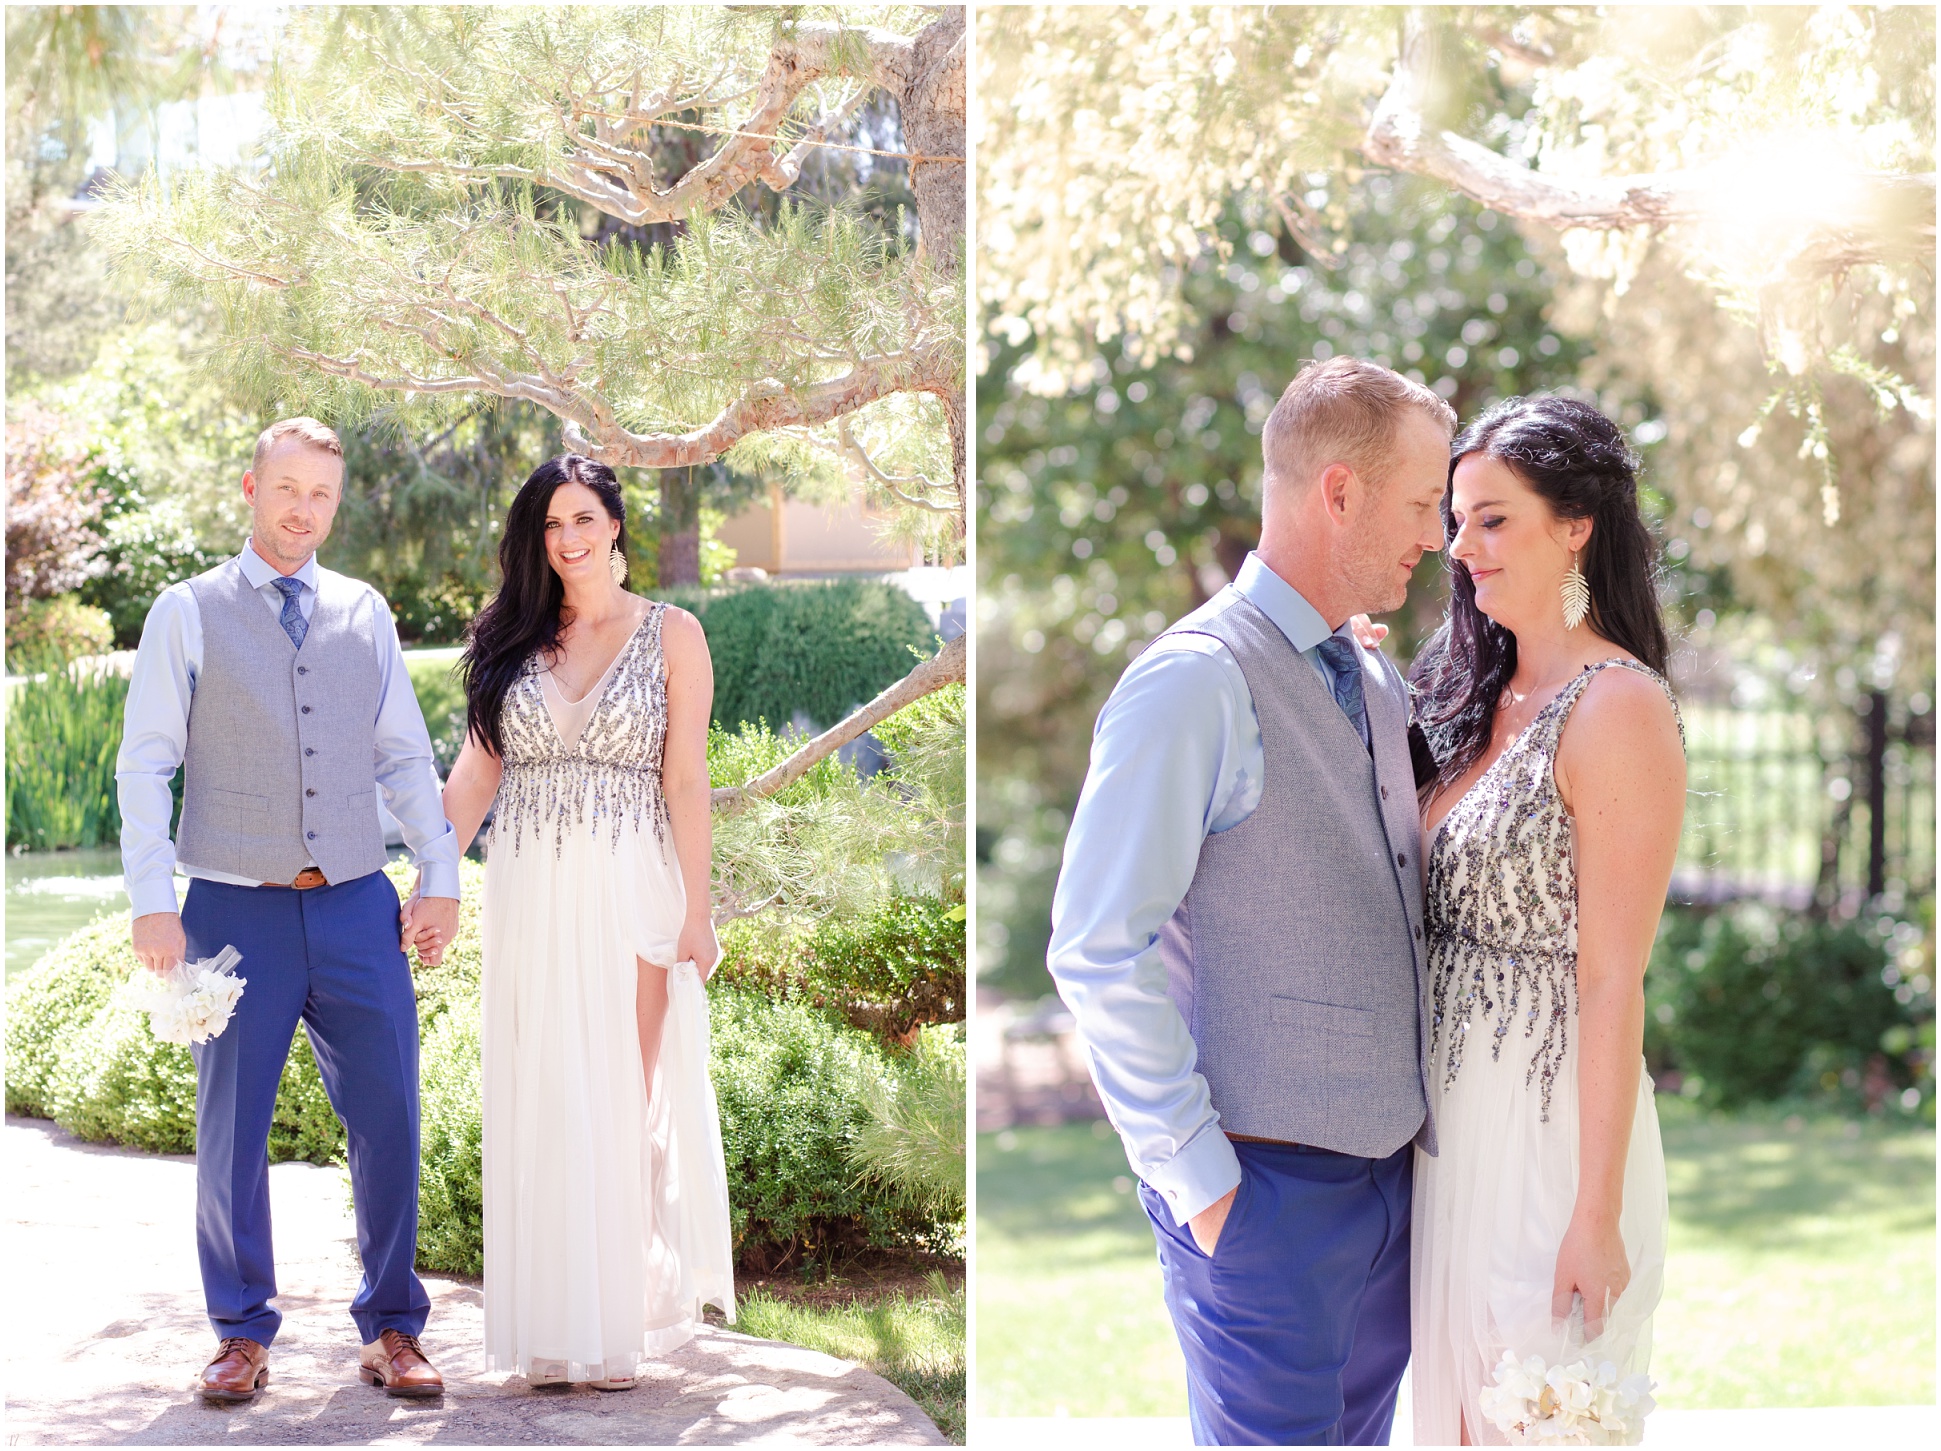 Two images of bride and groom at Phoenix Japanese Friendship Garden